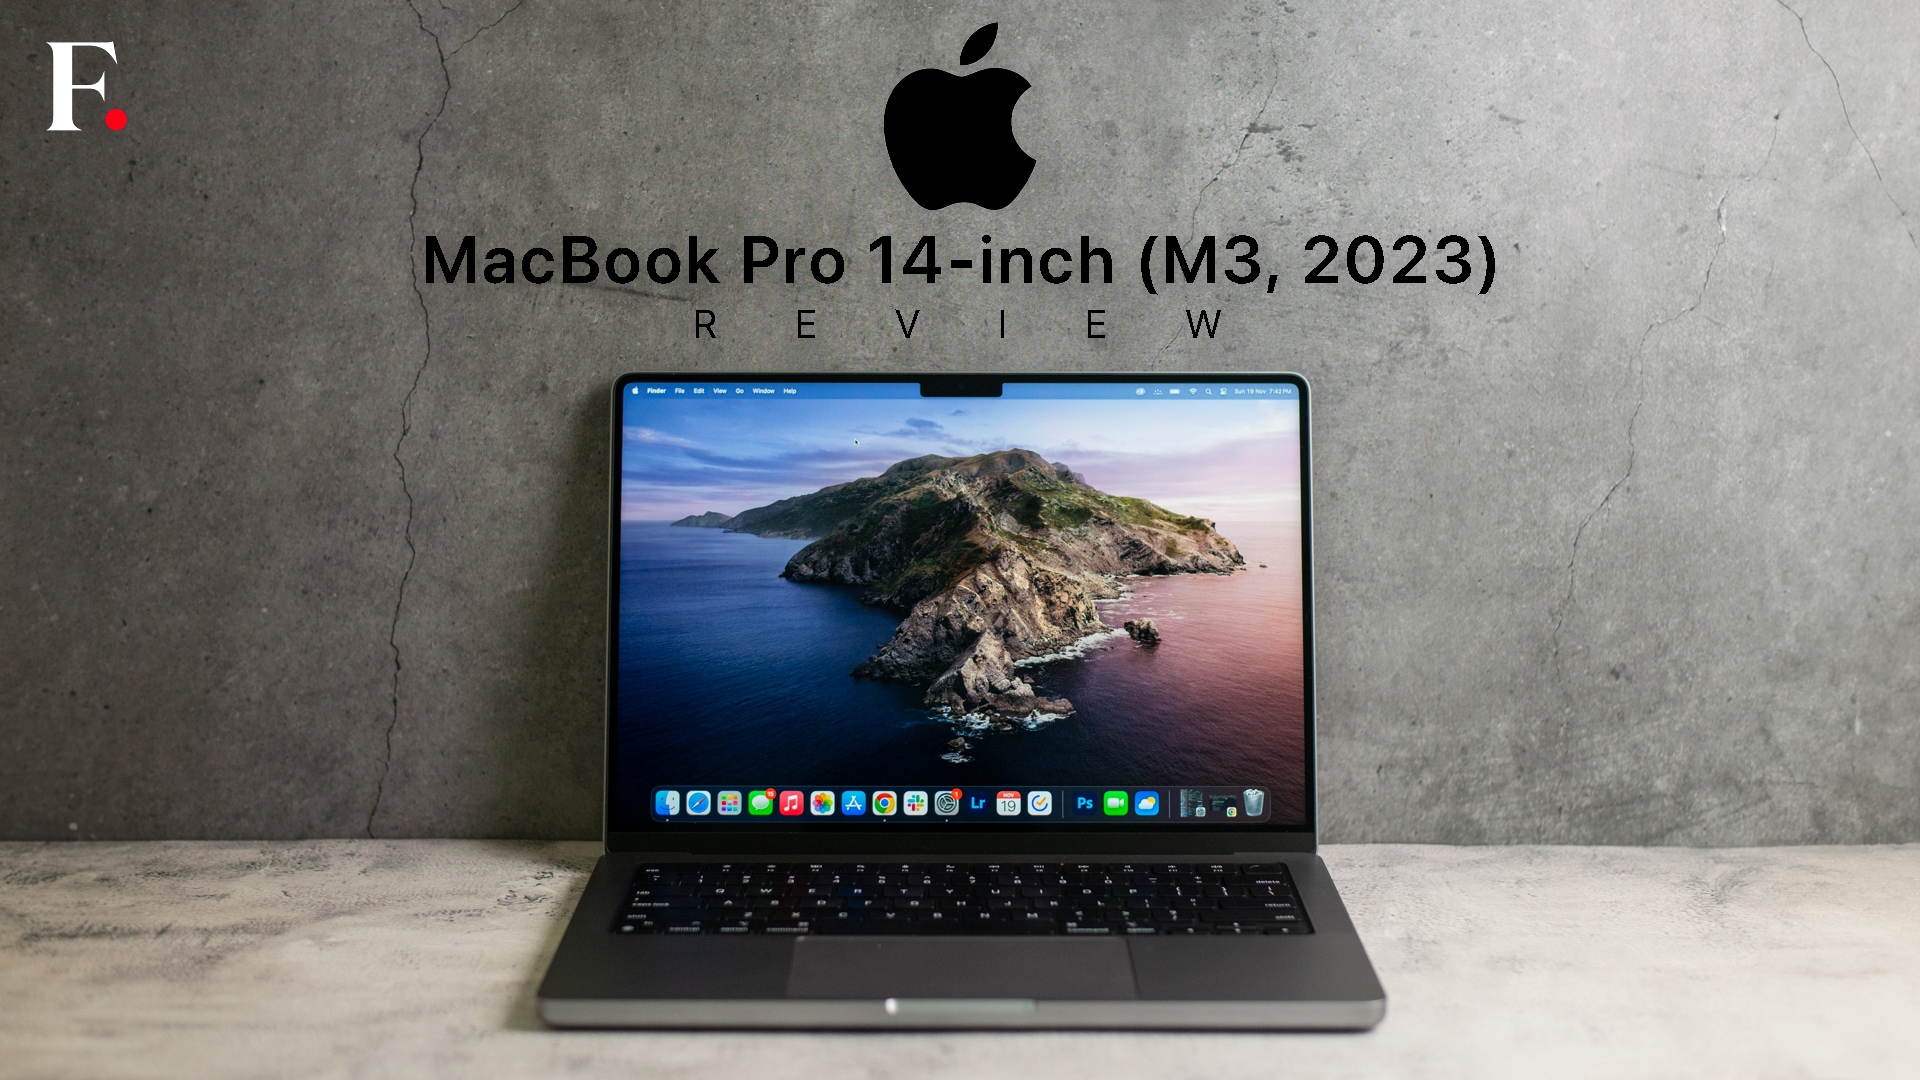 14-inch MacBook Pro with M3 chip: 10 things you need to know about